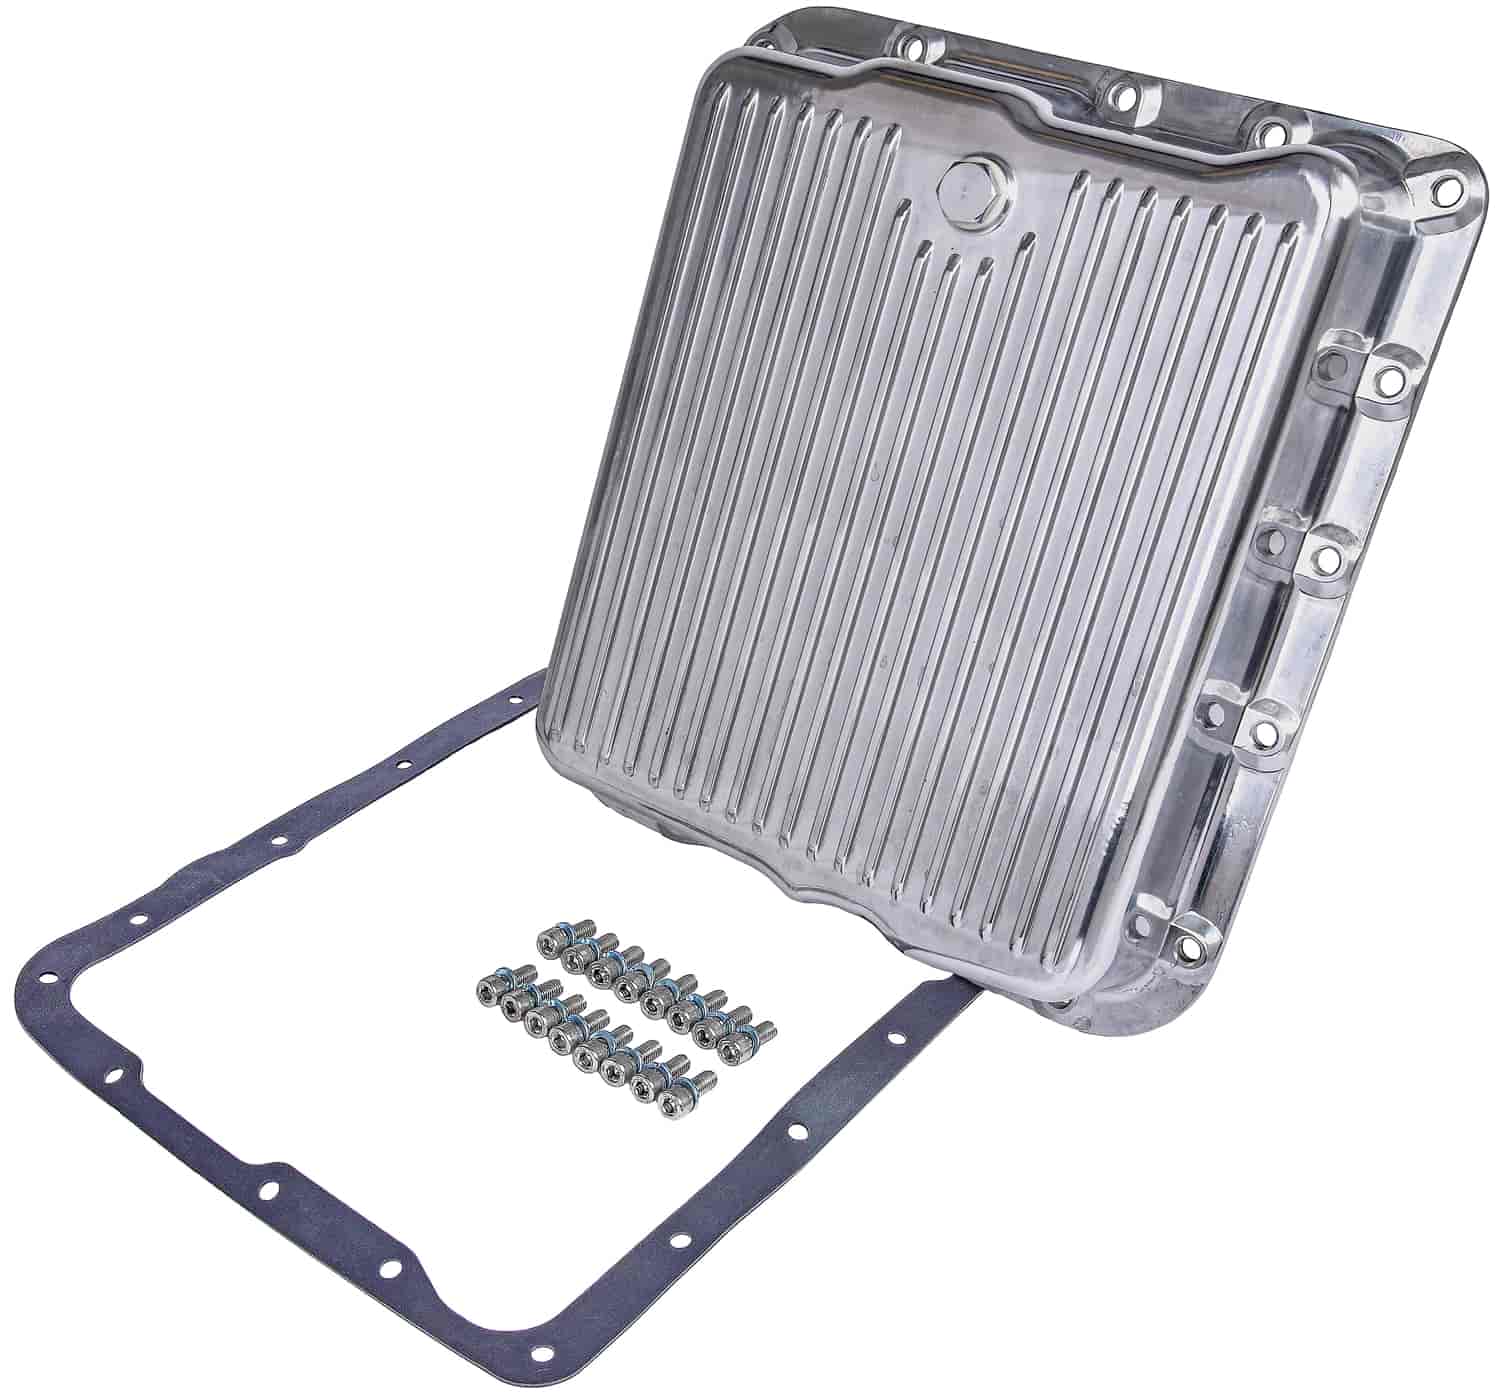 JEGS 60183: Polished Aluminum Transmission Pan for TH700-R4 and 4L60 JEGS